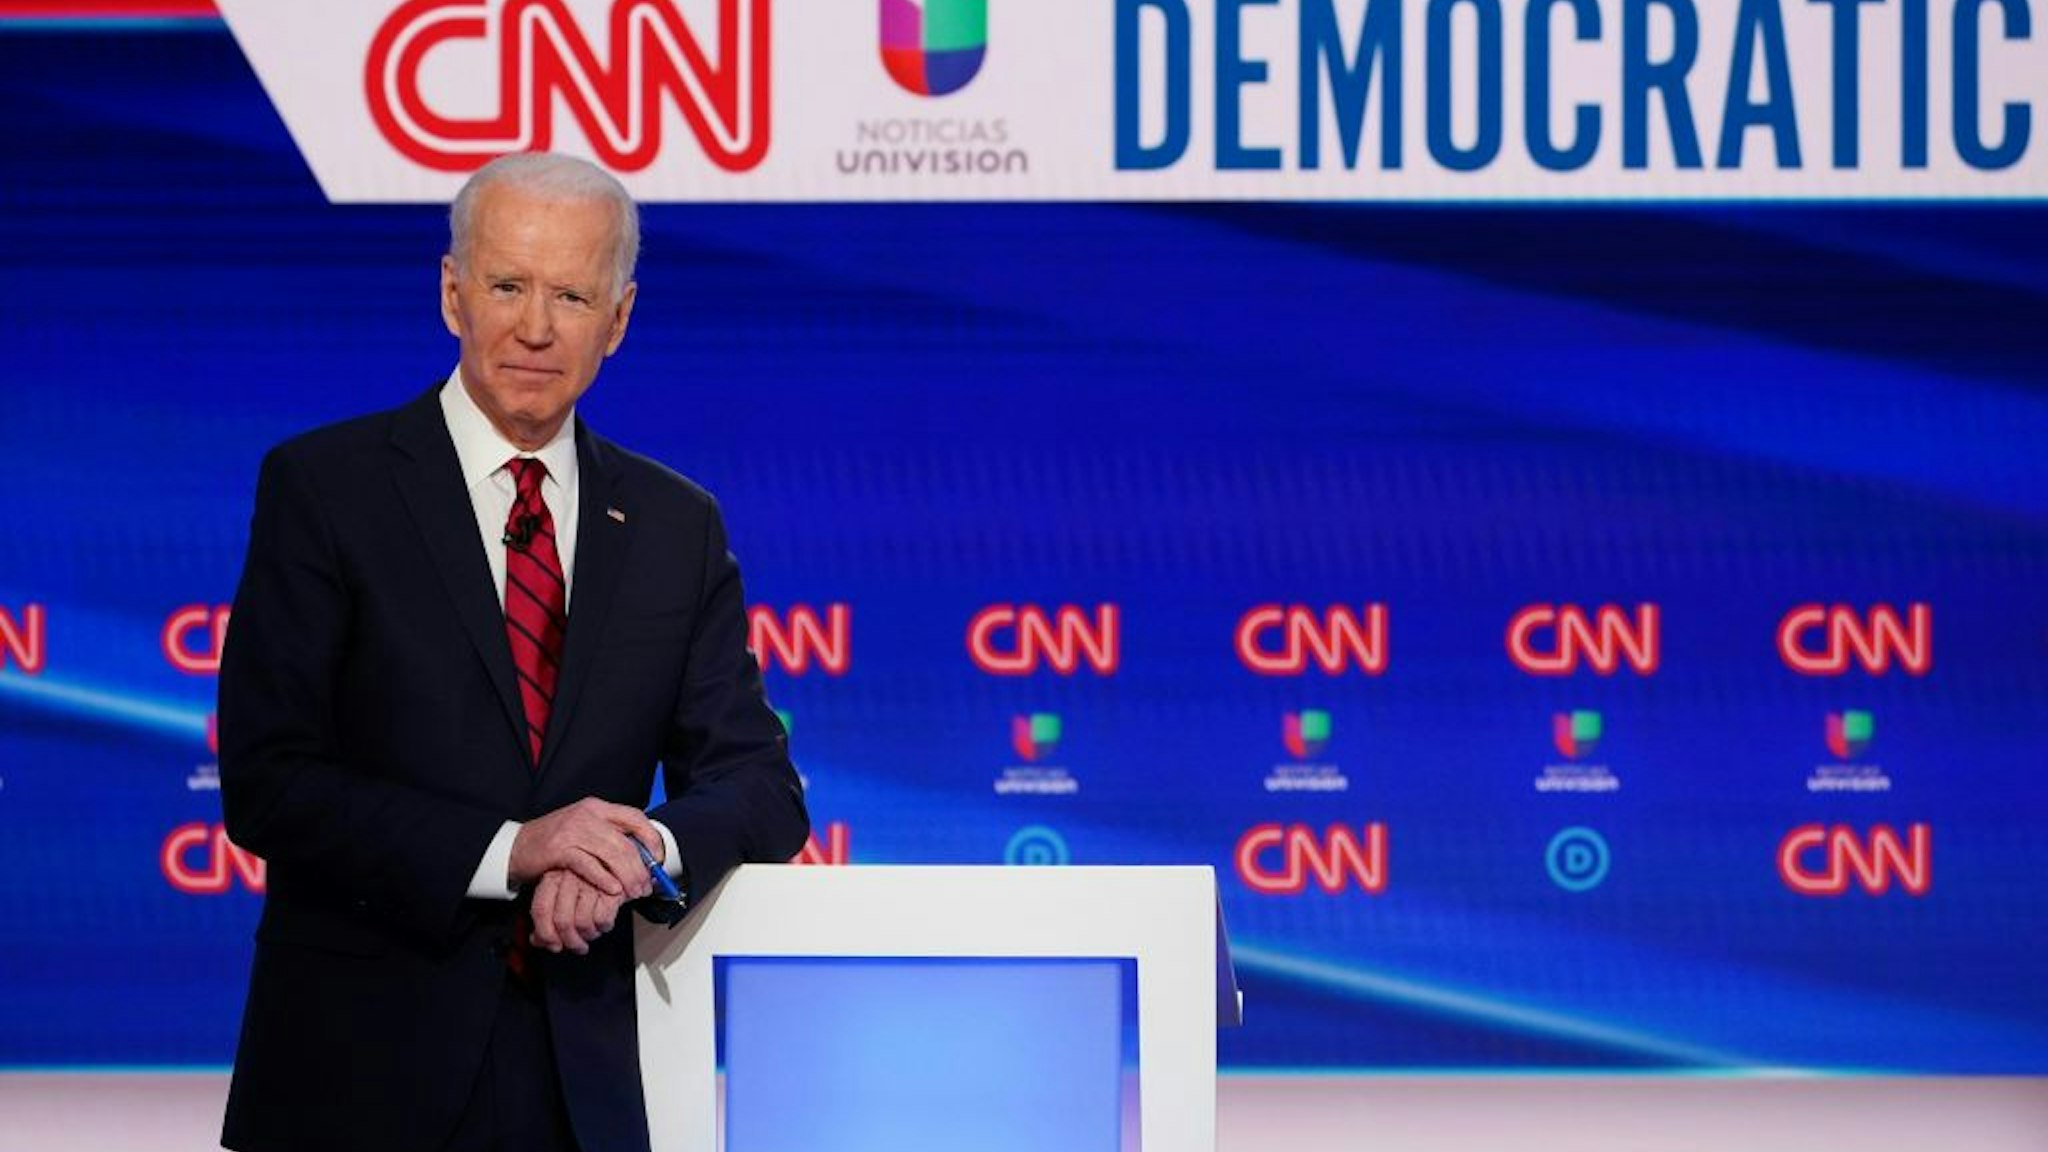 Democratic presidential hopeful former US vice president Joe Biden is seen on stage as he and Senator Bernie Sanders take part in the 11th Democratic Party 2020 presidential debate in a CNN Washington Bureau studio in Washington, DC on March 15, 2020. (Photo by Mandel NGAN / AFP) (Photo by MANDEL NGAN/AFP via Getty Images)